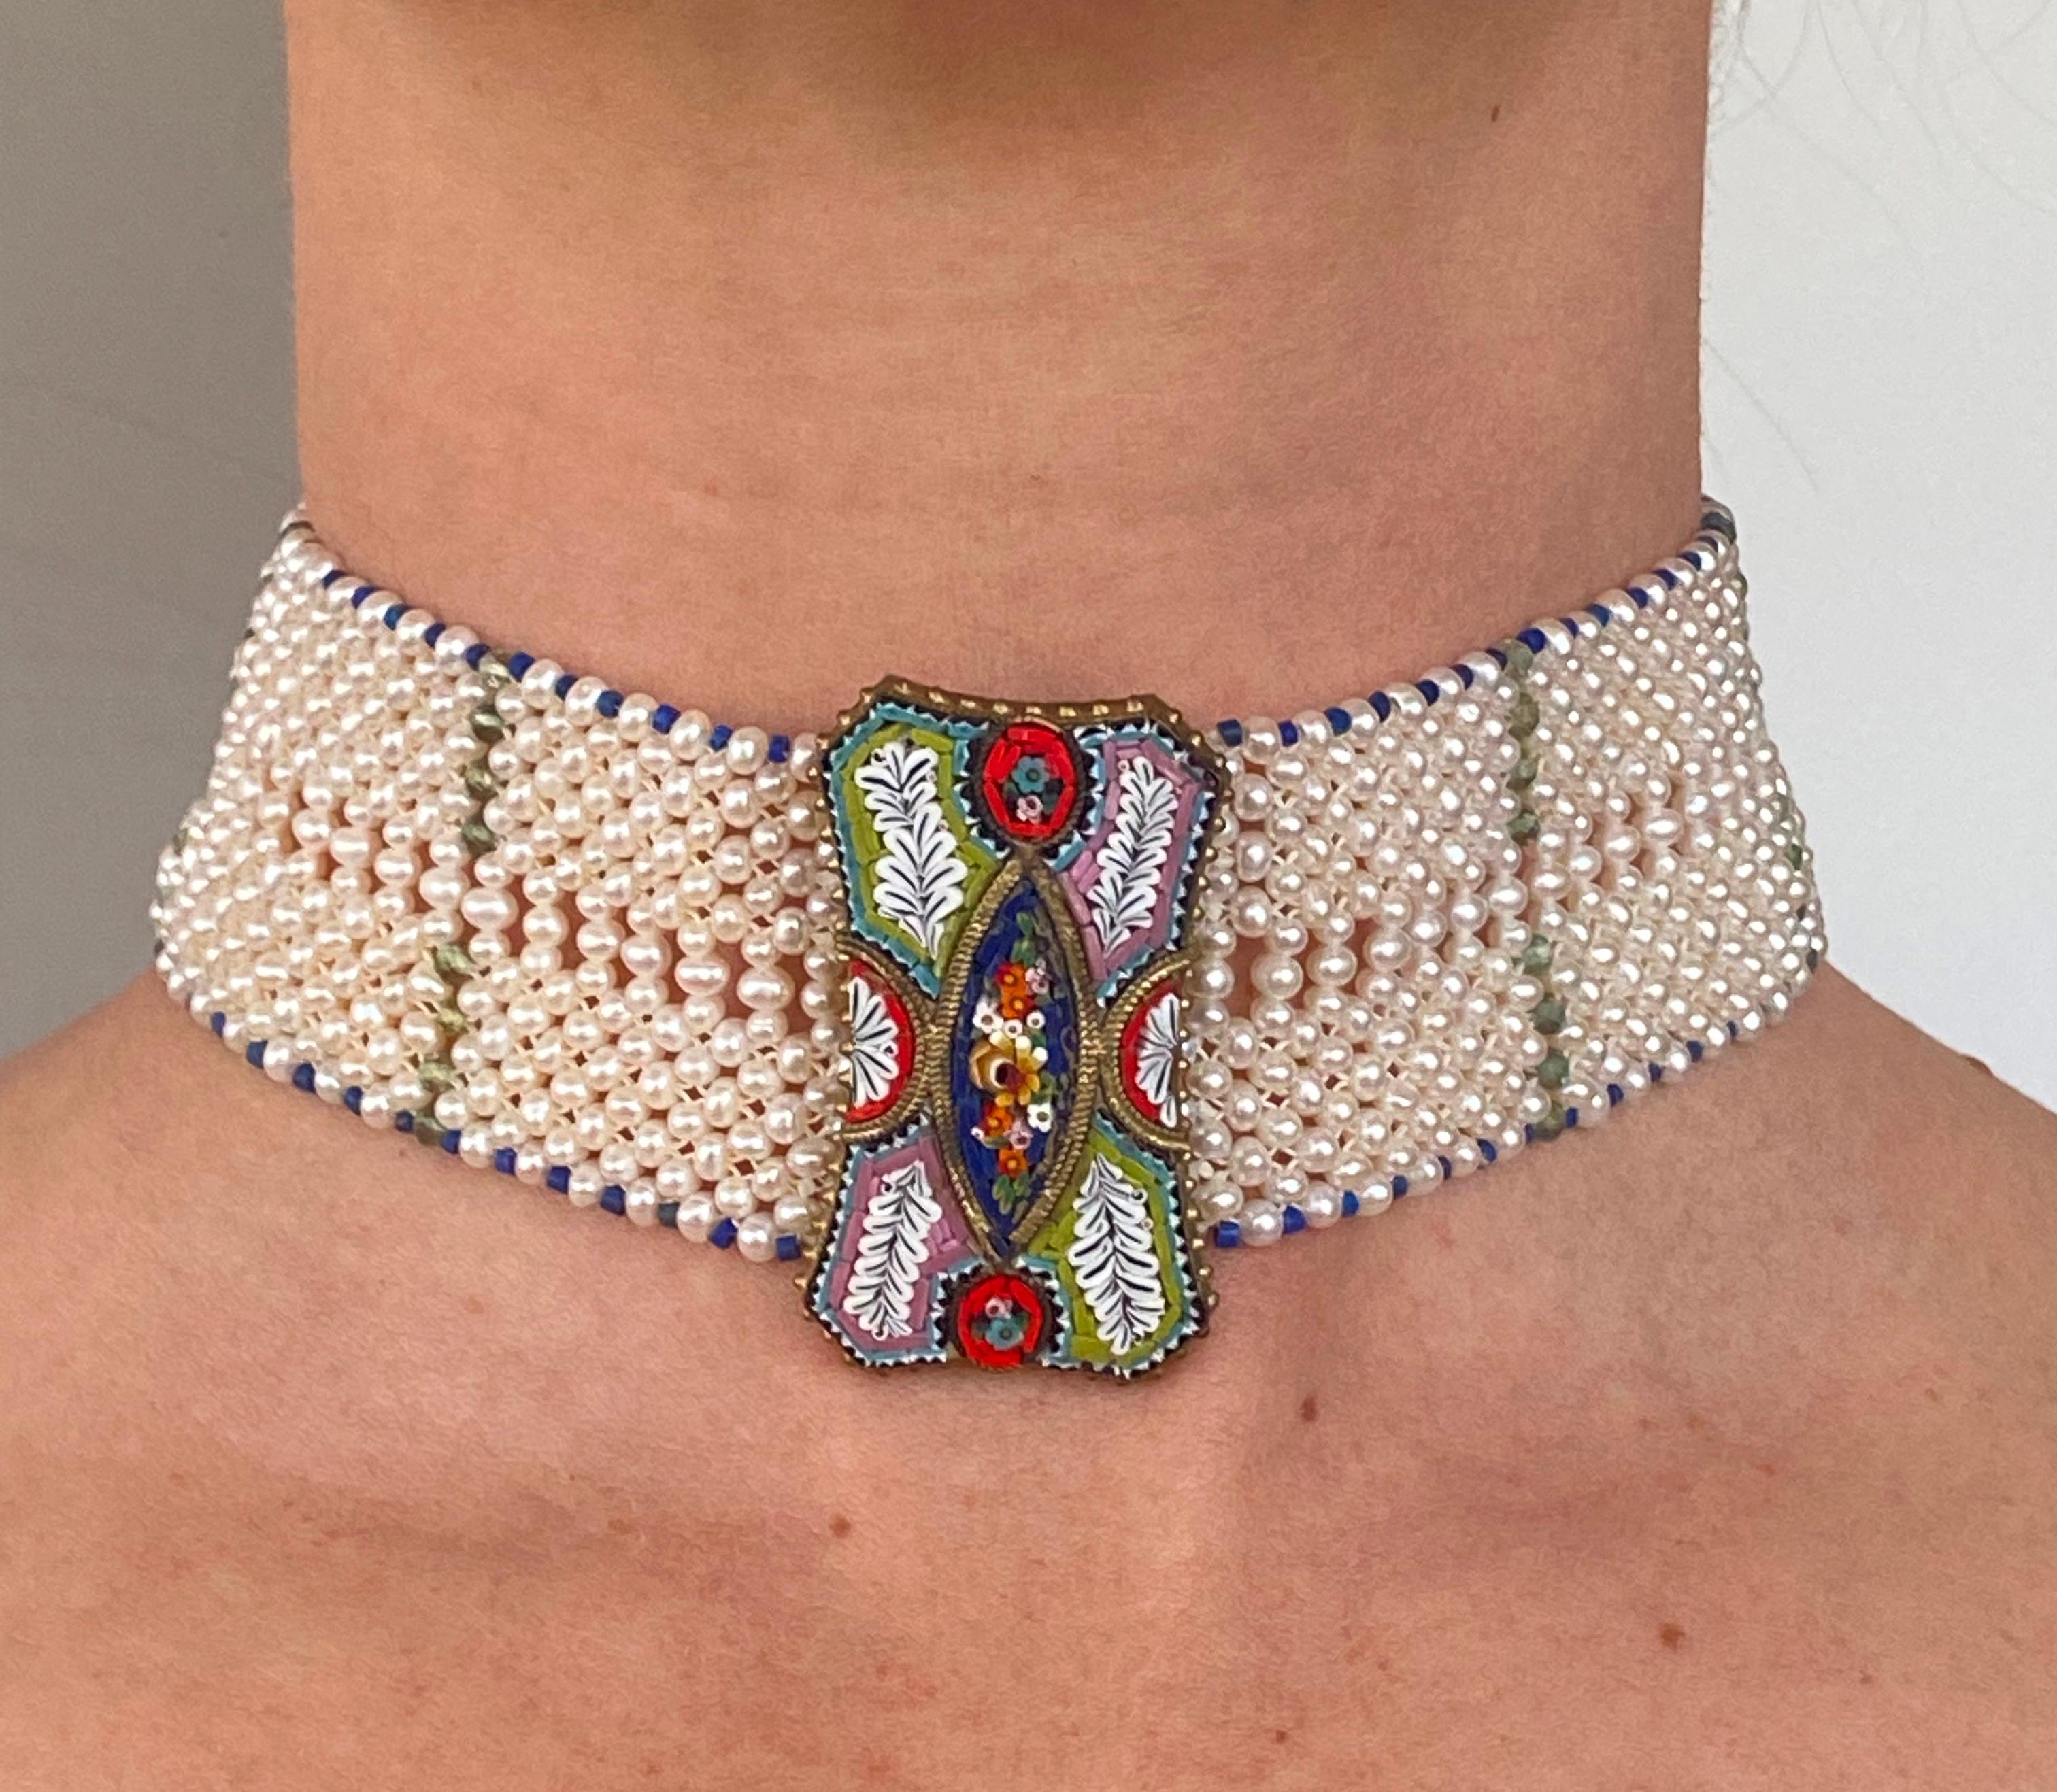 Artisan Marina J. Woven Pearl Choker with Mosaic Centerpiece, Lapis and Green Apatite For Sale